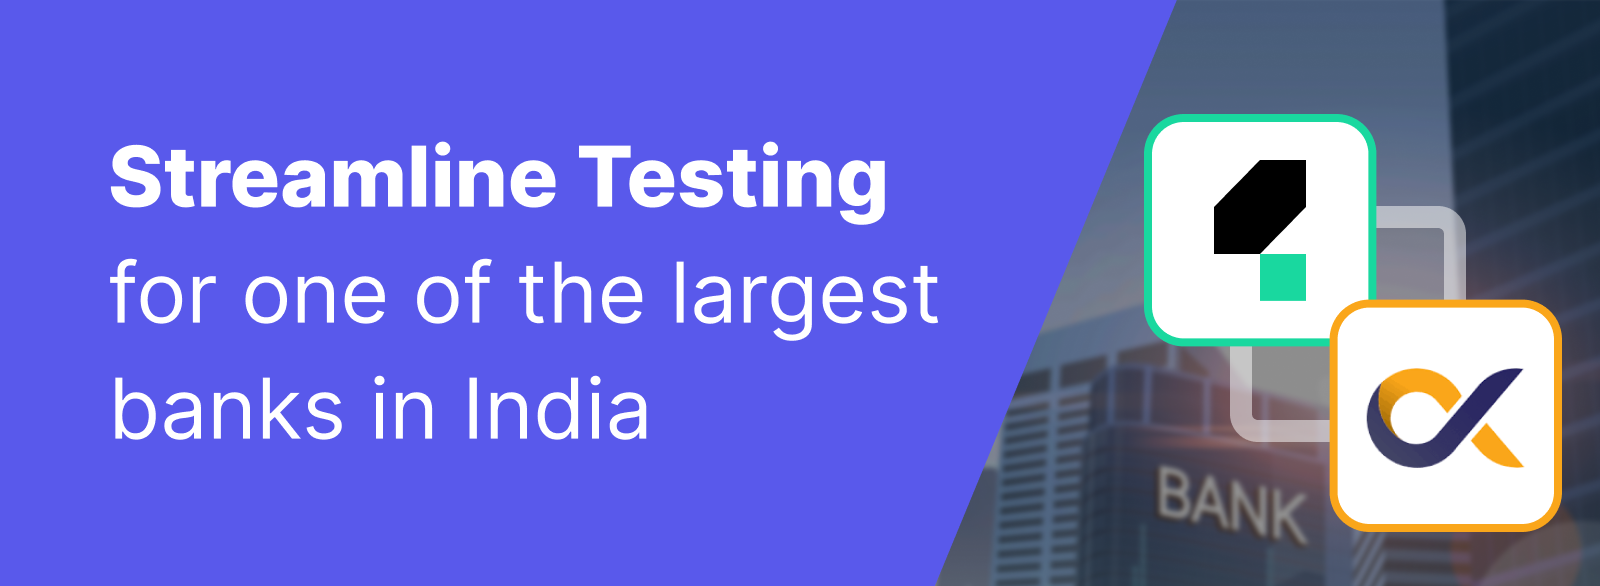 Streamline testing for a top India bank - banner.png